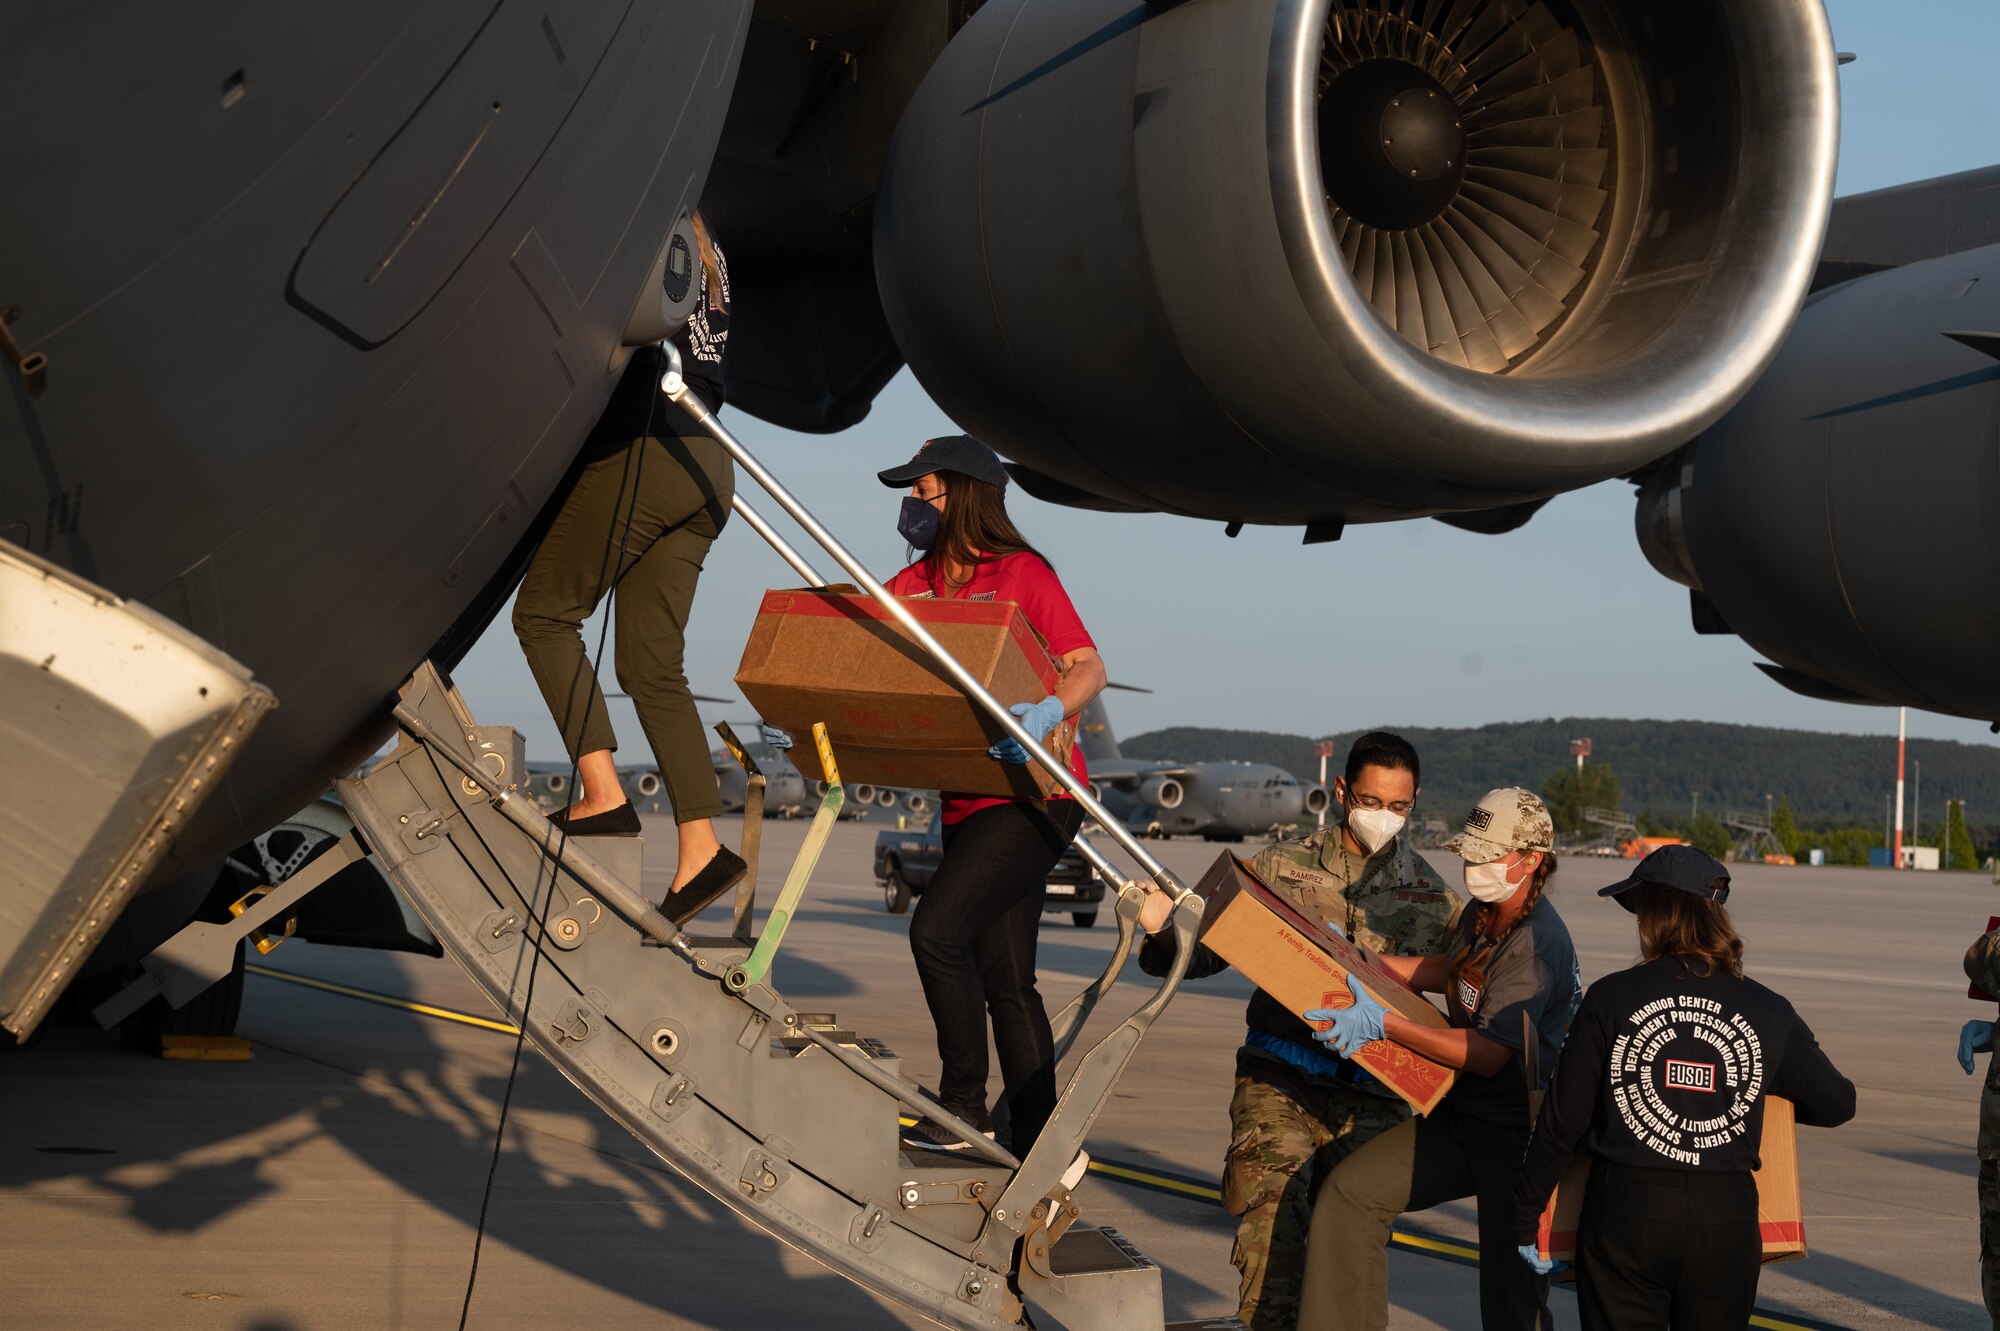 Supplies are carried onto aircraft.